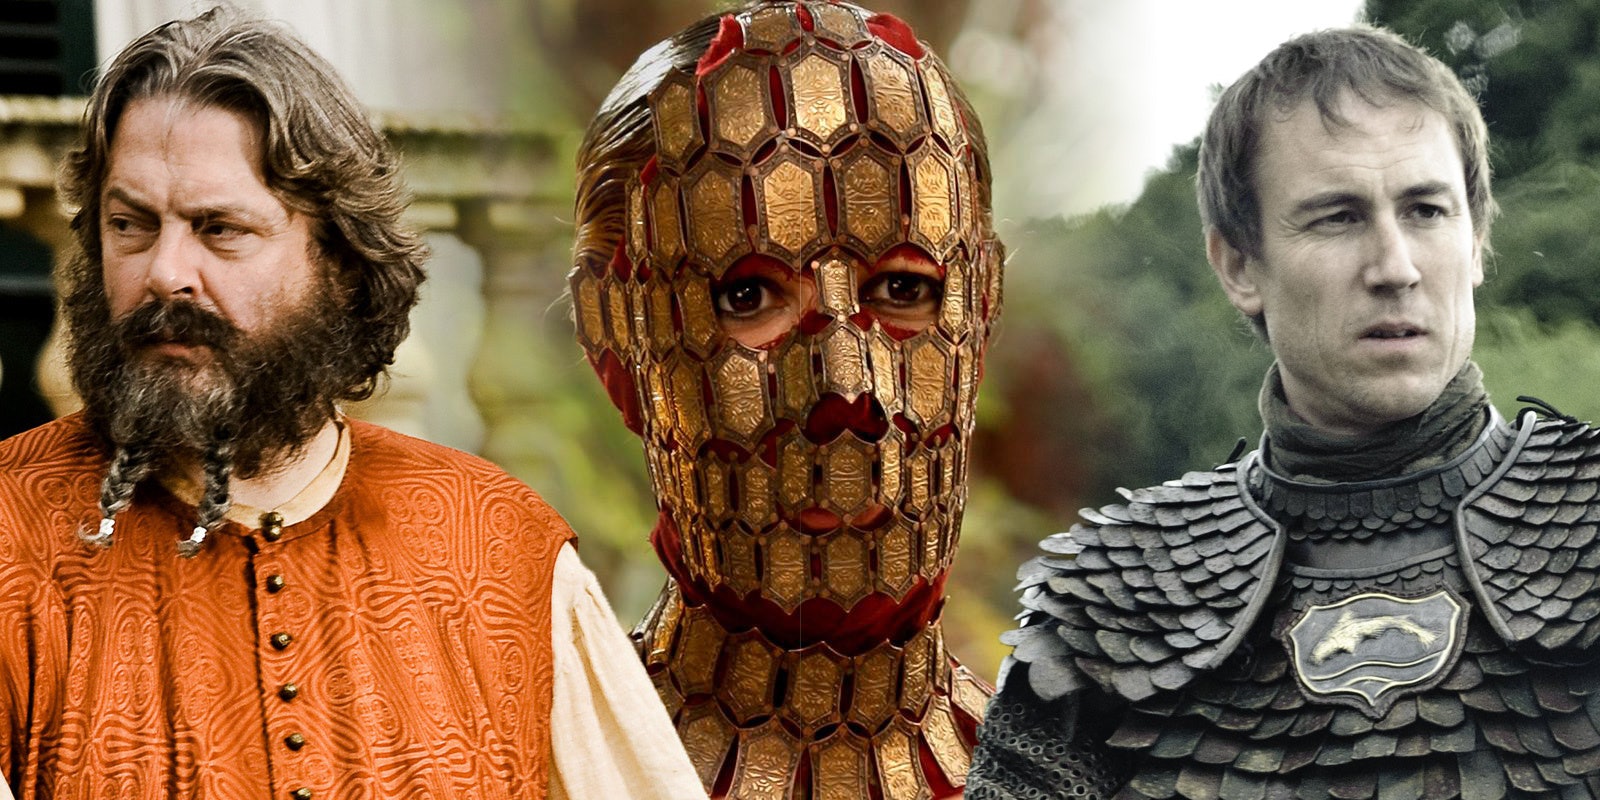 game of thrones character list dead or alive